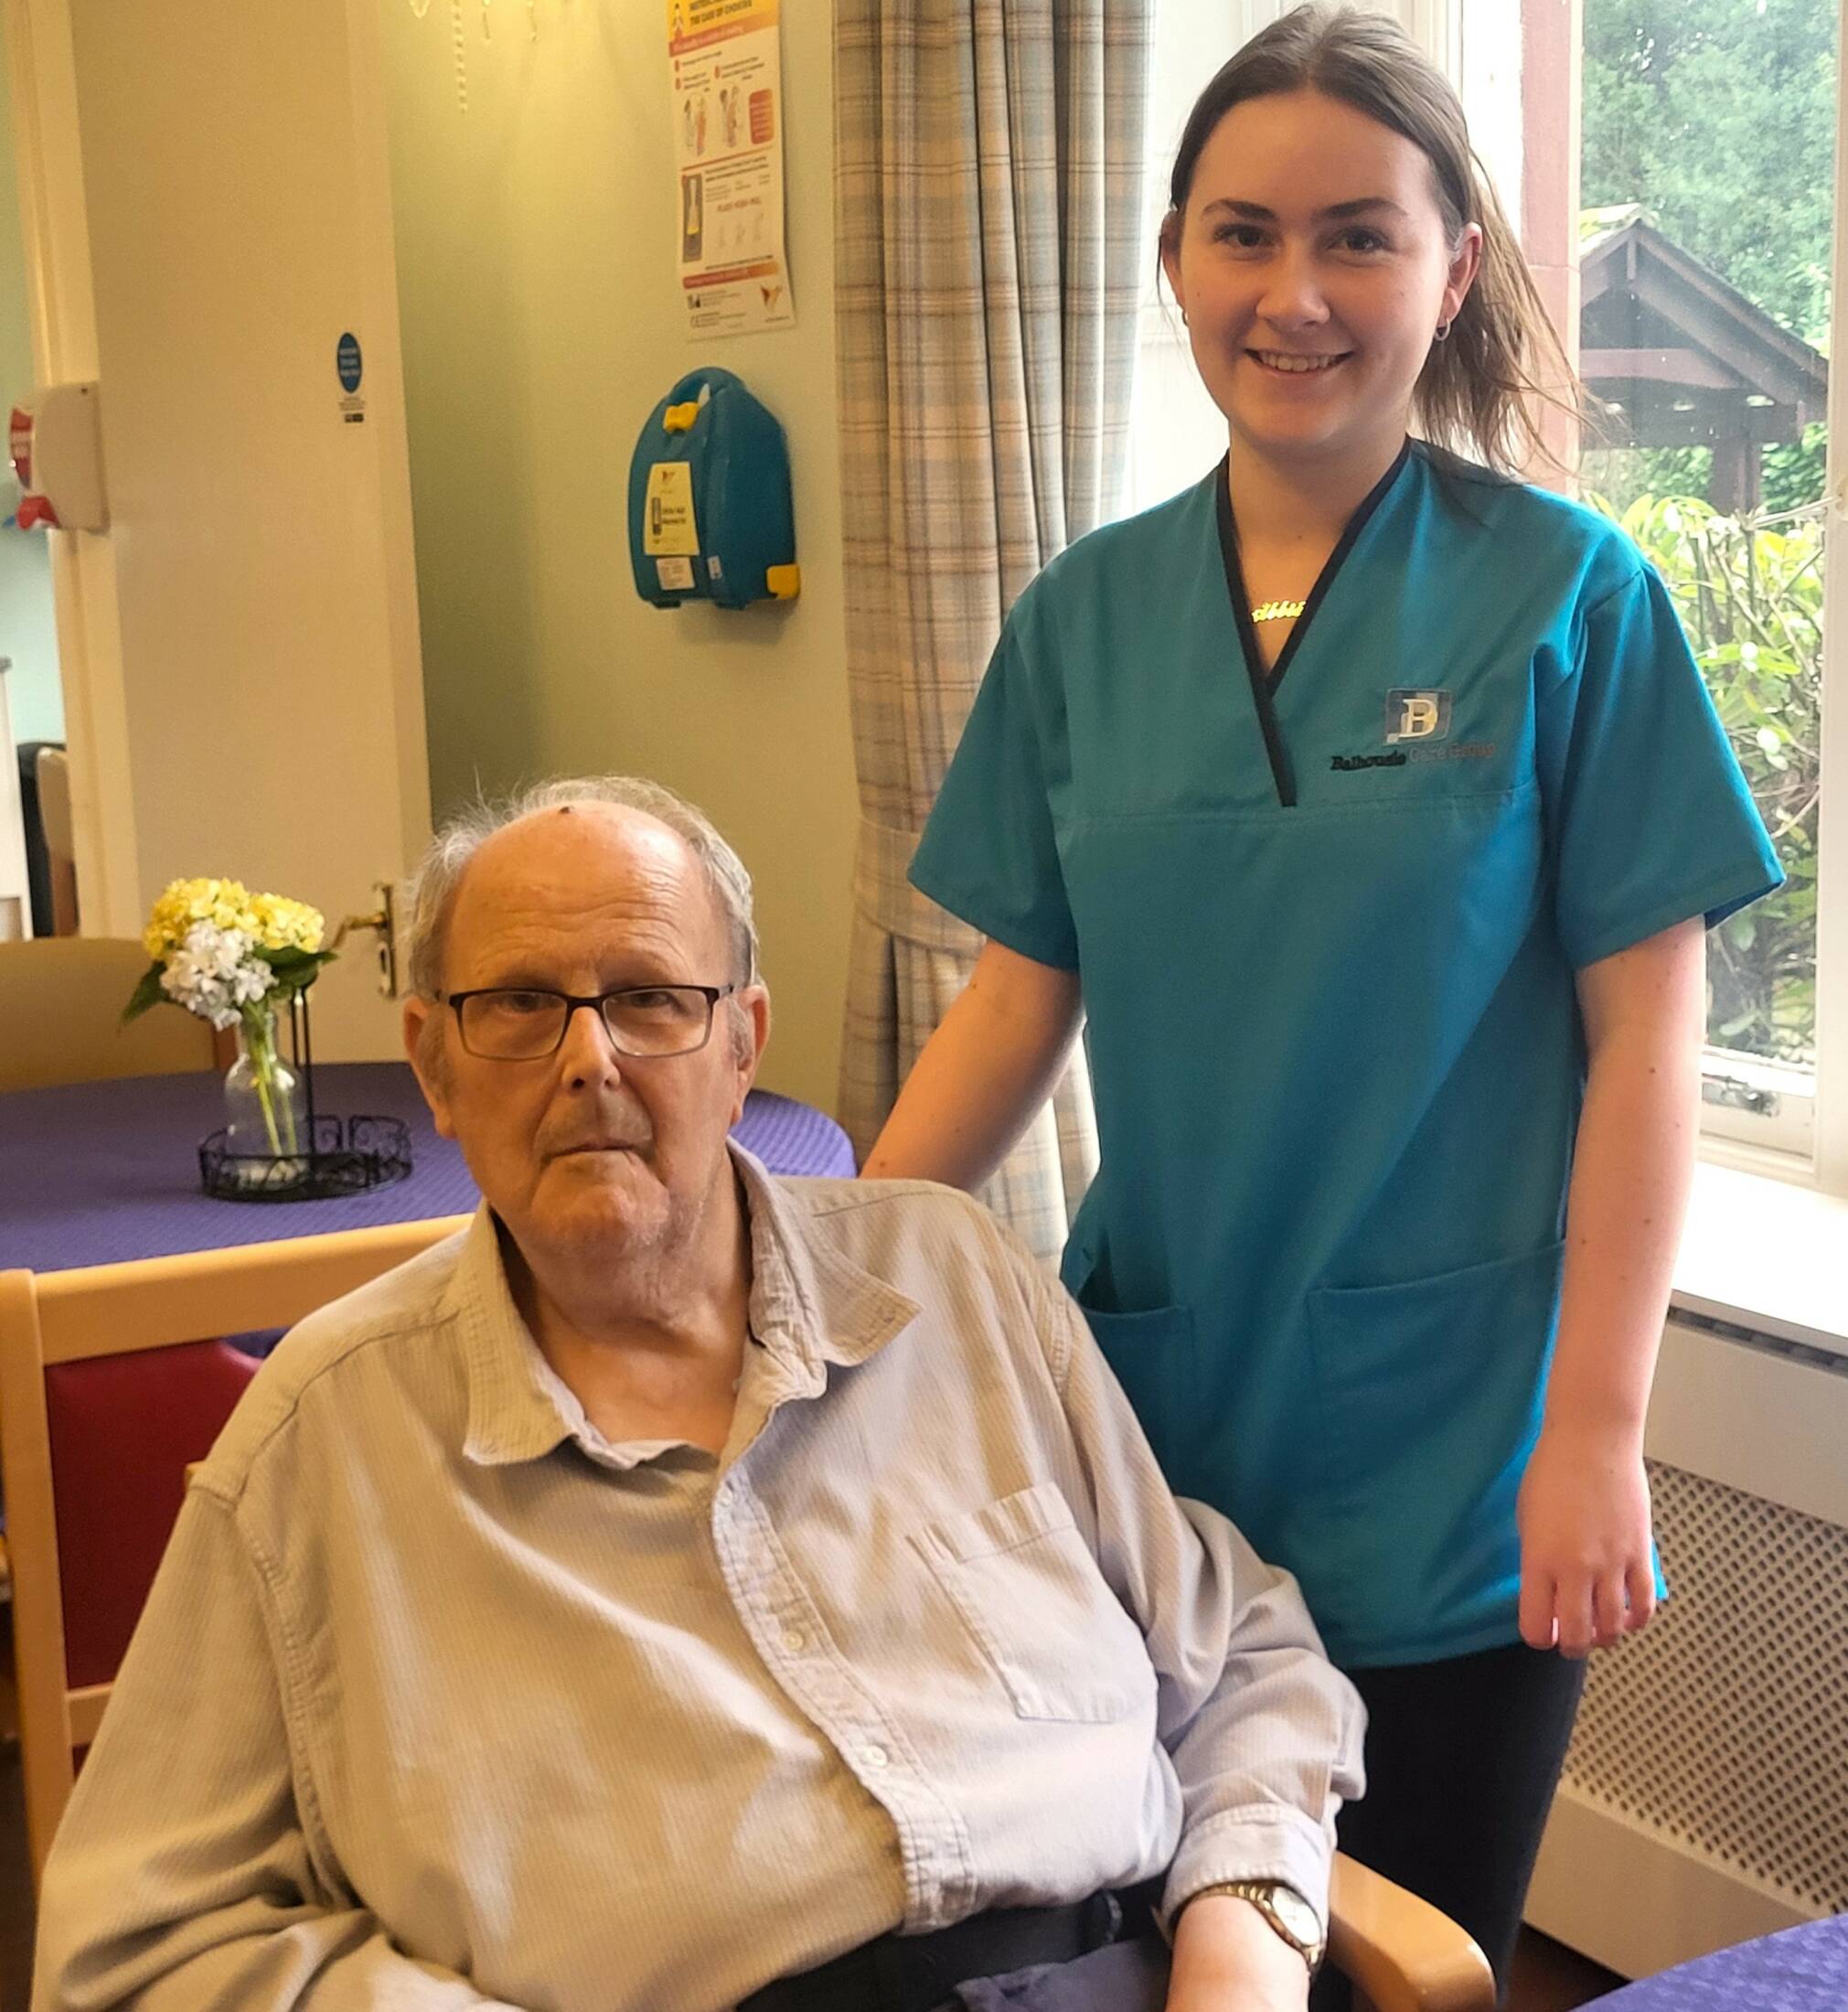 David Rattray, a resident at Balhousie Lisden care home with Care Assistant. Abbie Ogilvy